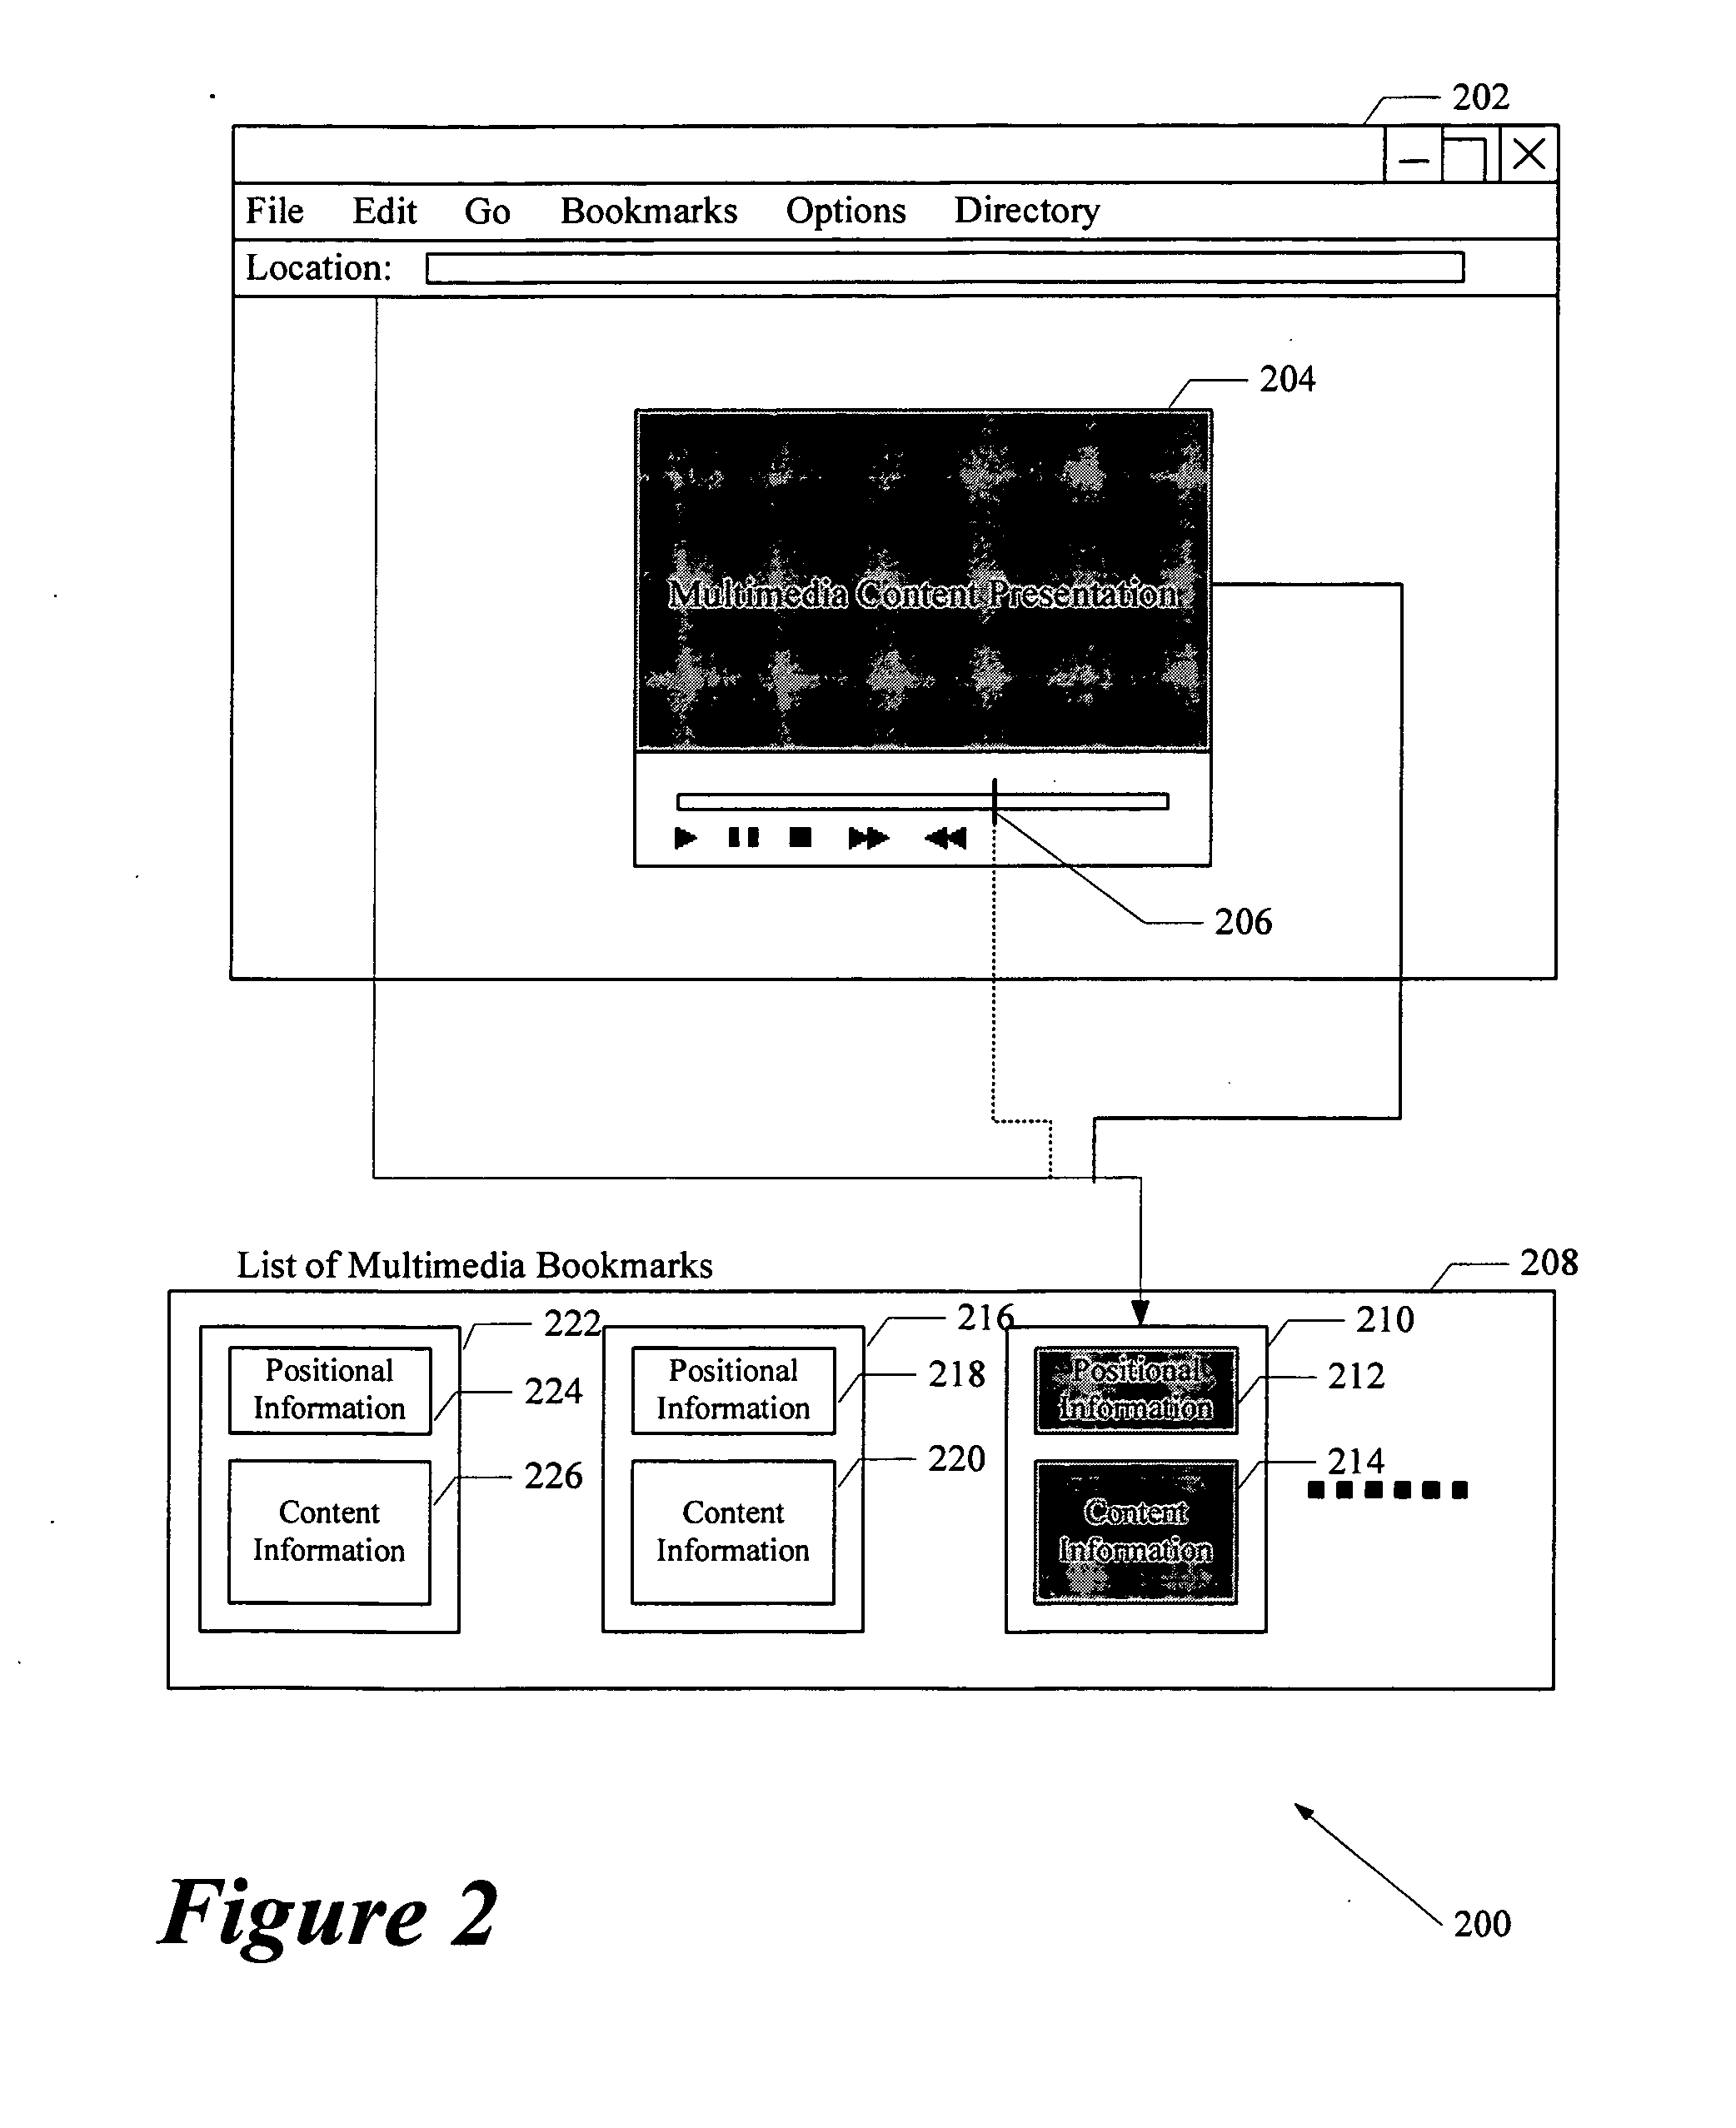 Method For Verifying Inclusion Of Attachments To Electronic Mail Messages